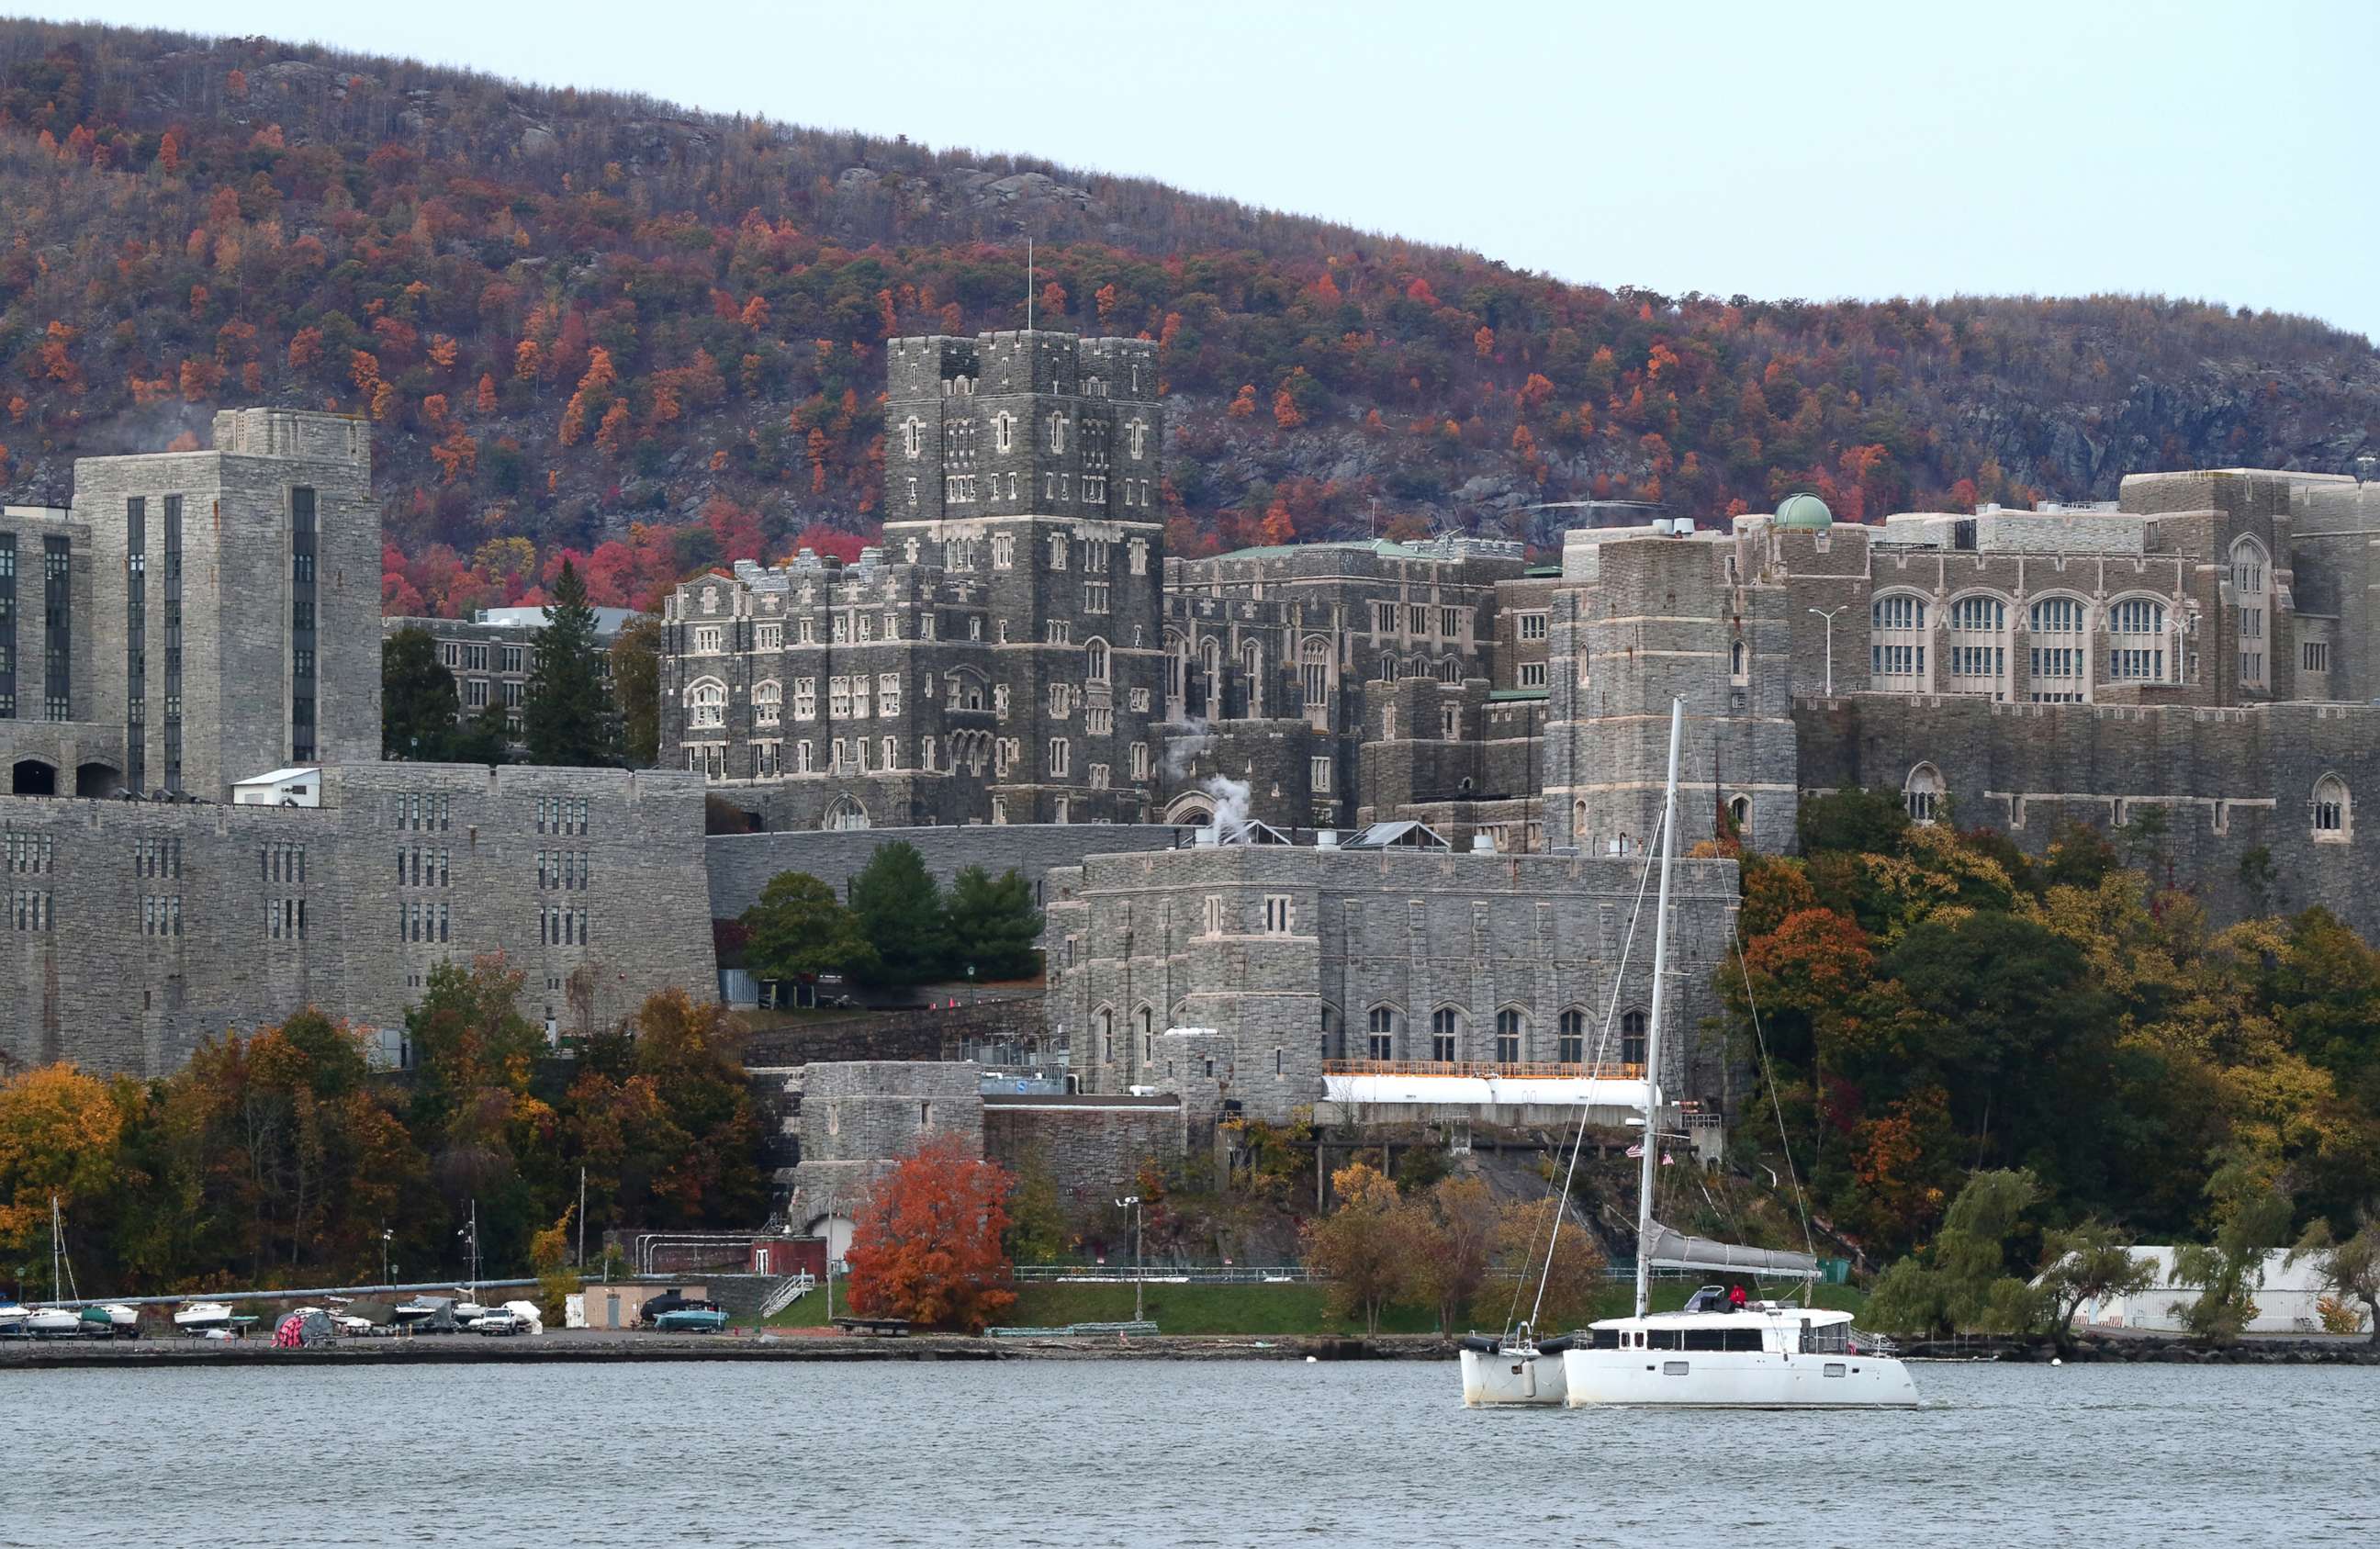 PHOTO: A boat sails in the Hudson River in front of the United States Military Academy, West Point, Oct. 25, 2020 as seen from Garrison, N.Y.